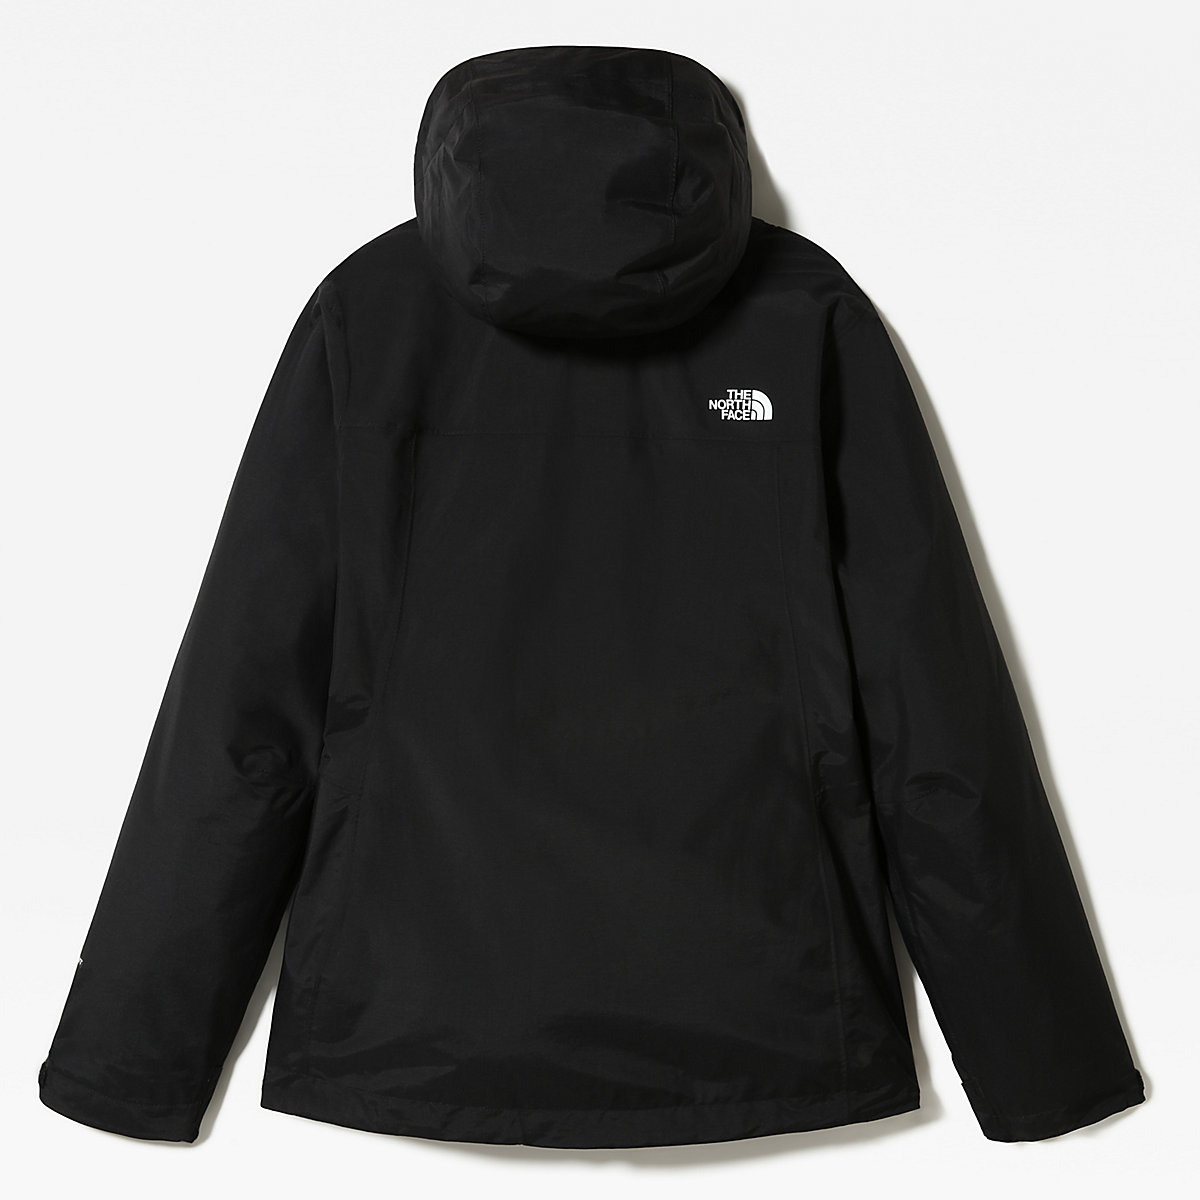 The North Face ORIGINAL TRICLIMATE JACKET